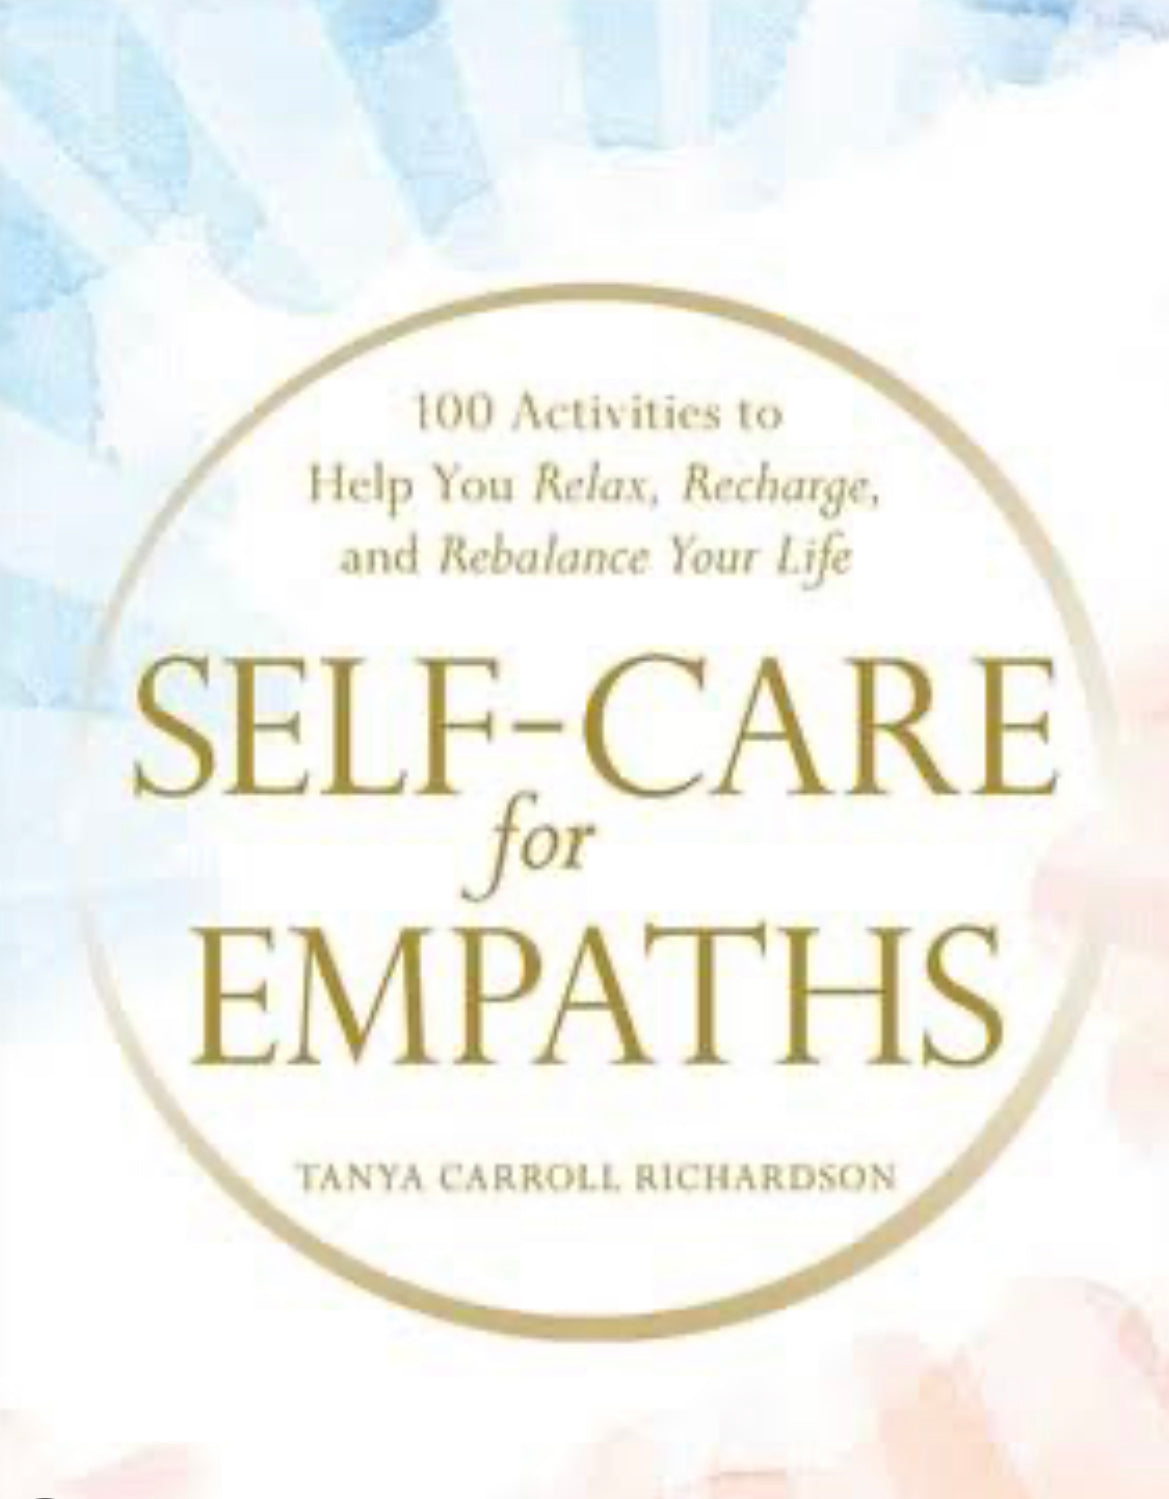 Self Care For Empaths Book - 100 Activities to Help You Relax, Recharge, and Rebalance Your Life